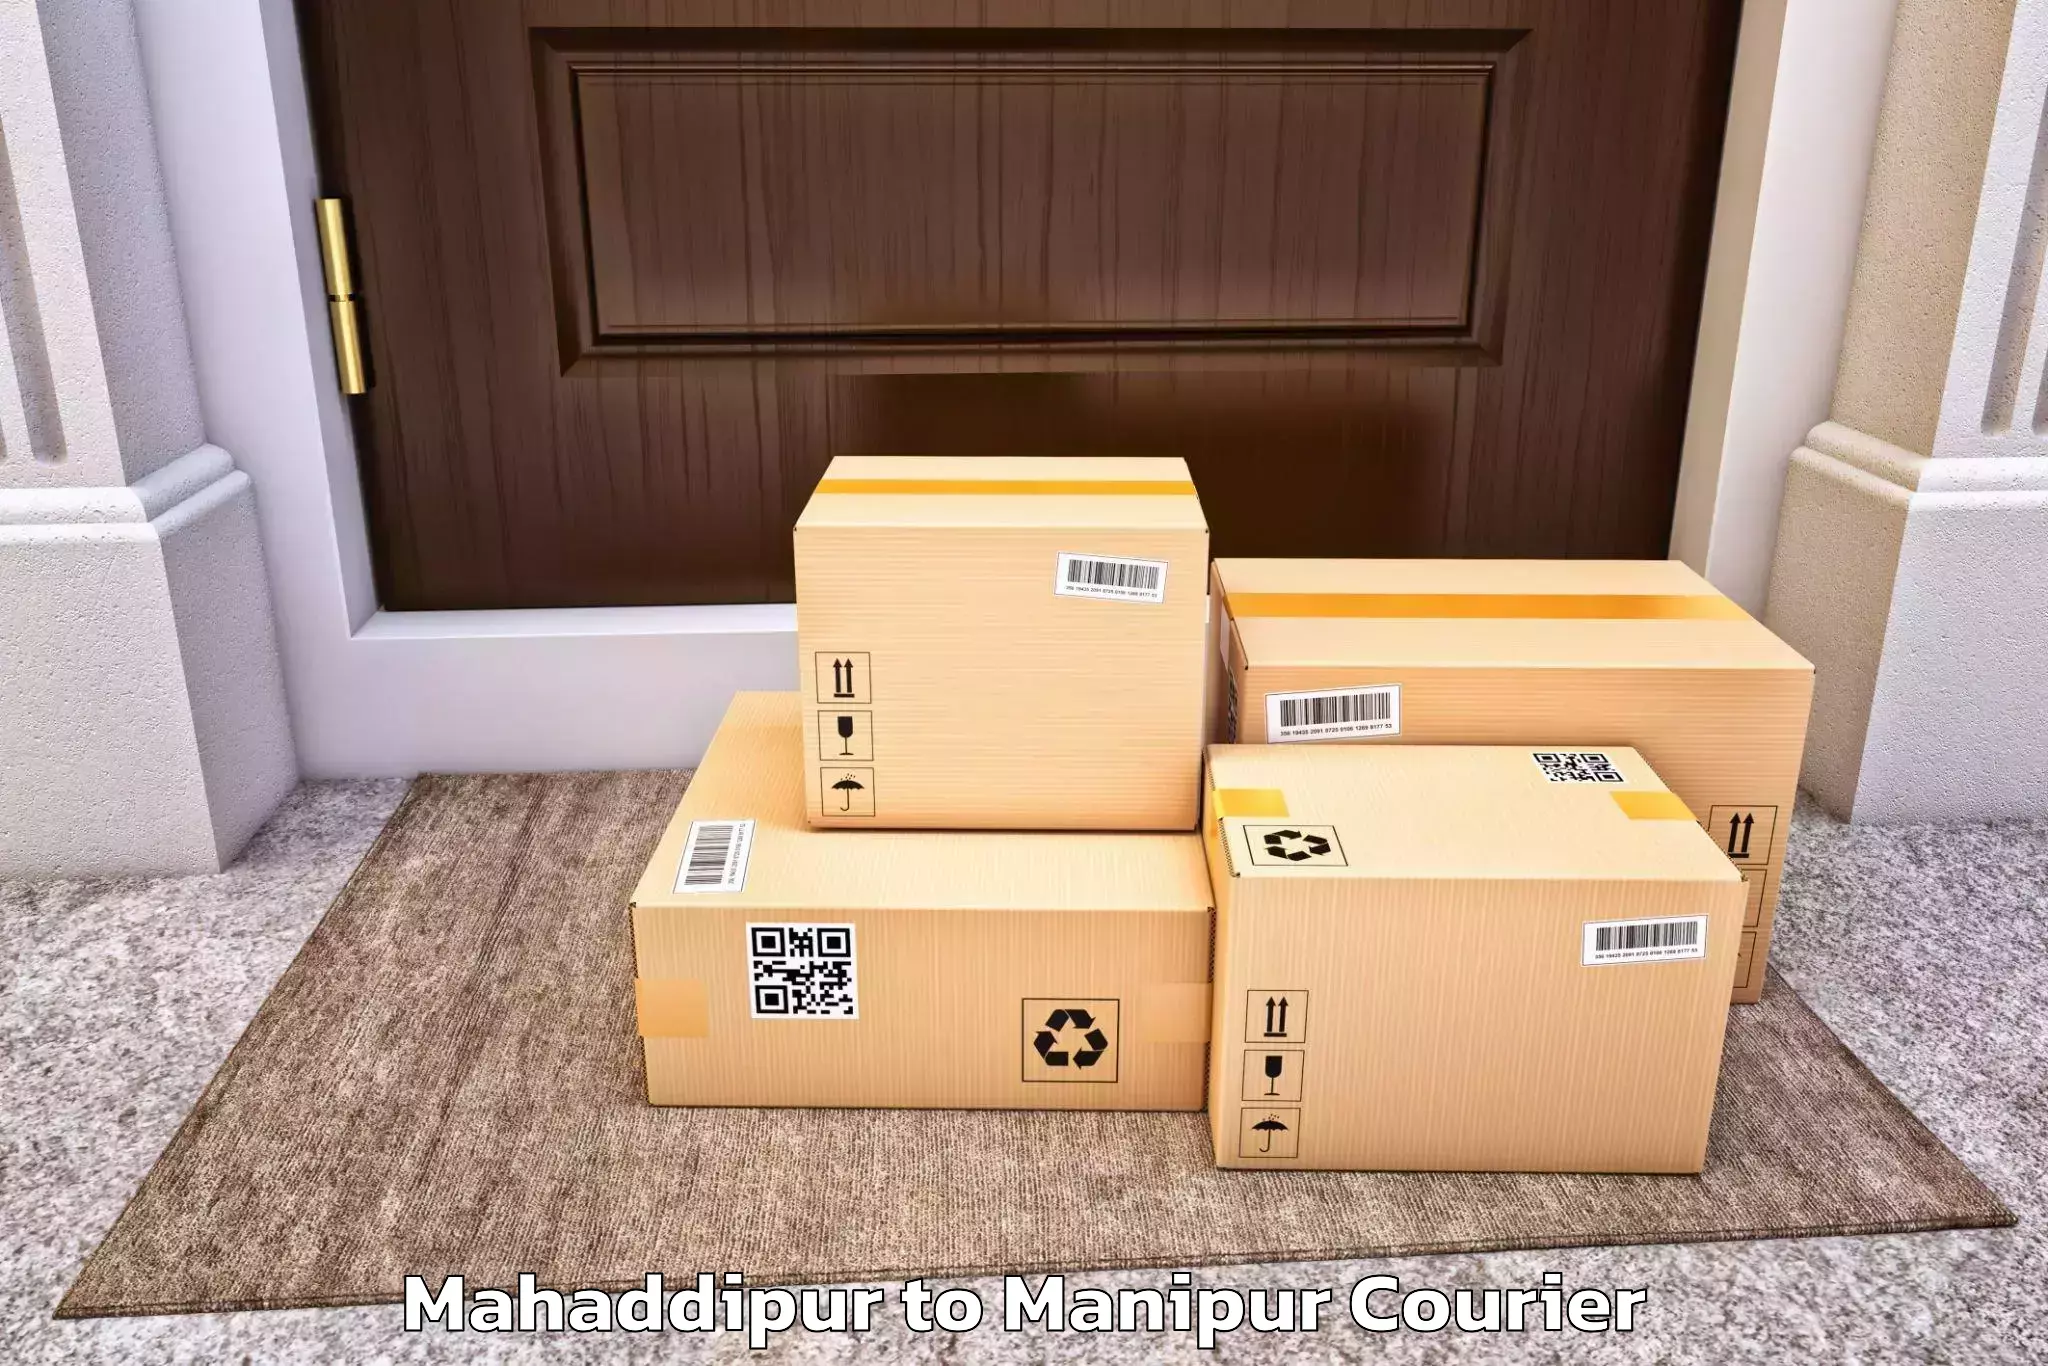 Nationwide furniture movers in Mahaddipur to Chandel